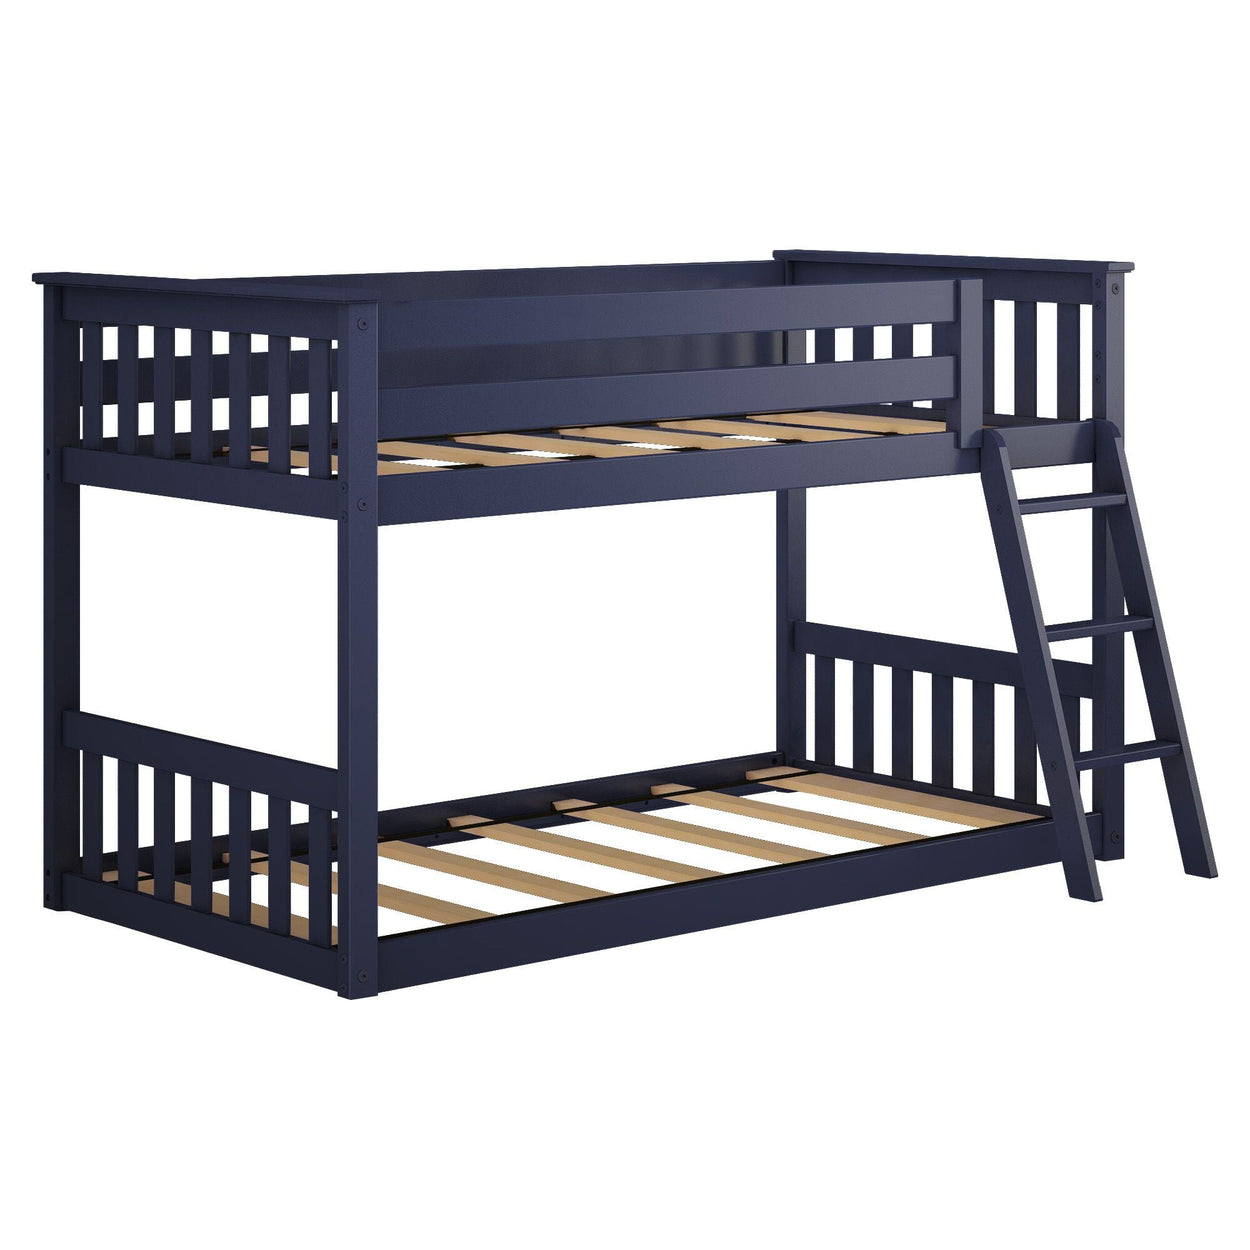 180214-131 : Bunk Beds Twin over Twin Low Bunk Bed, Blue